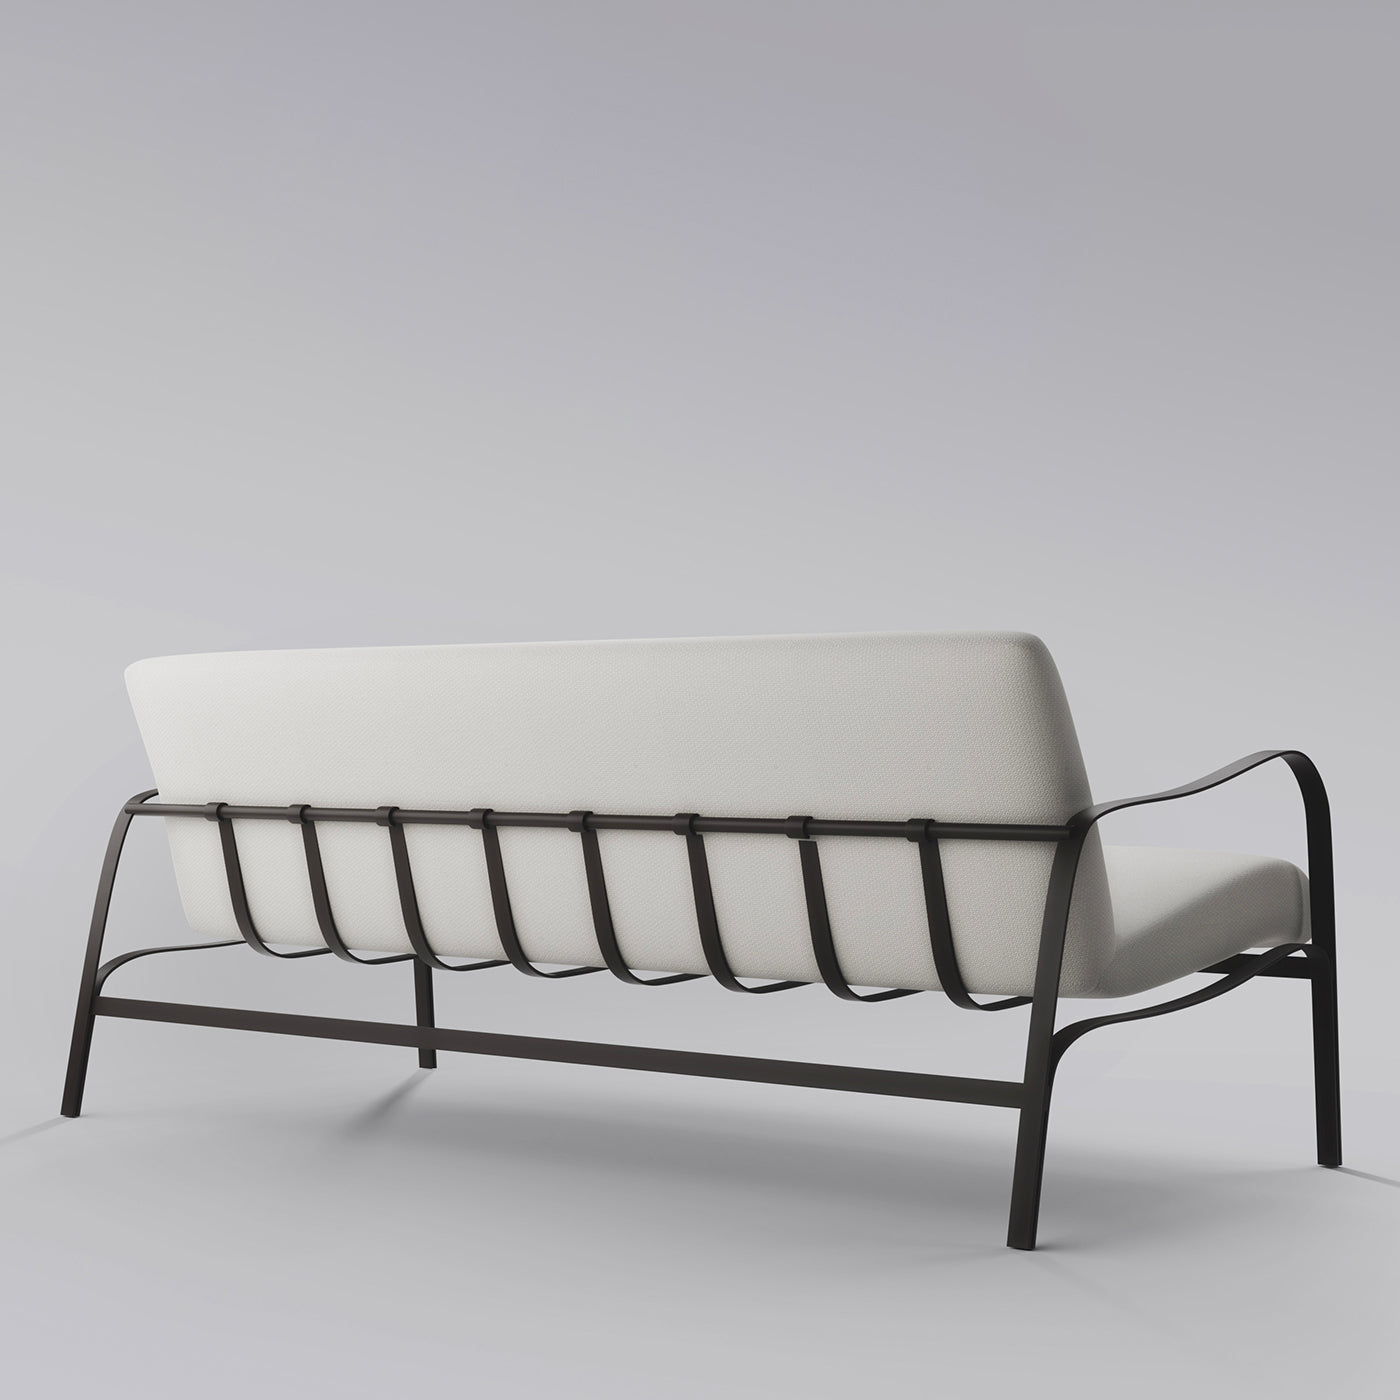 Amalfi White and Gray Sofa by Studio 63 in Stainless Steel - Alternative view 1